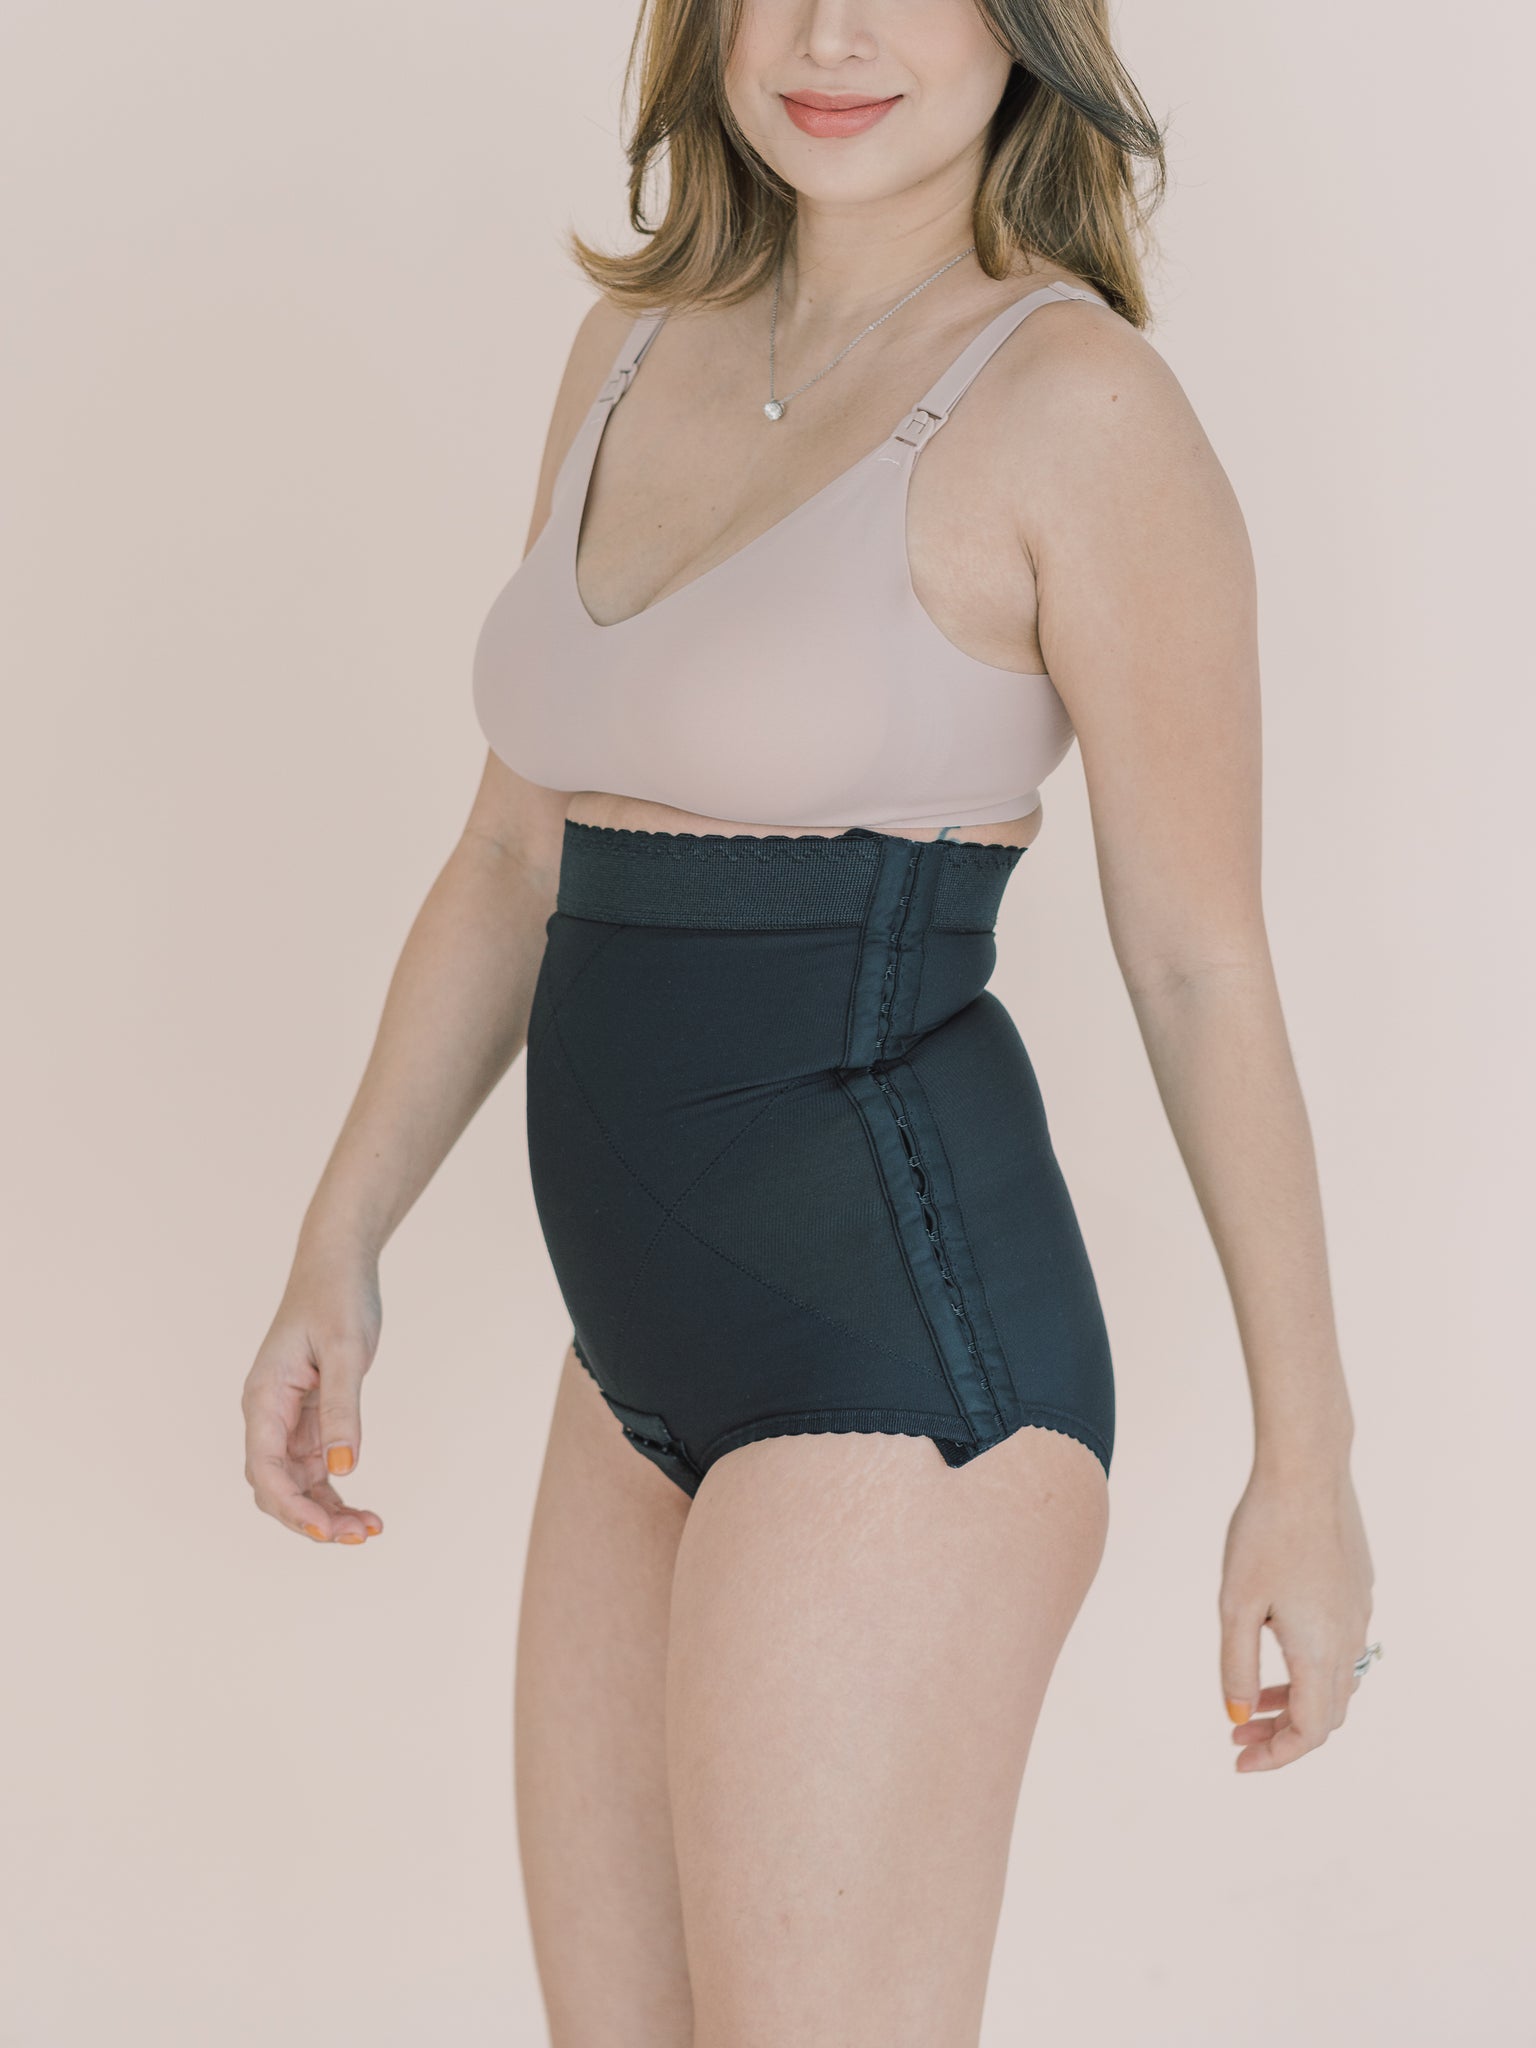 Wink Shapewear - The ULTIMATE compression garment. This line of our Wink  garments are our top pick and deliver the BEST results for postpartum &  post surgery recovery.🤰👶 This garment will: ✔️help